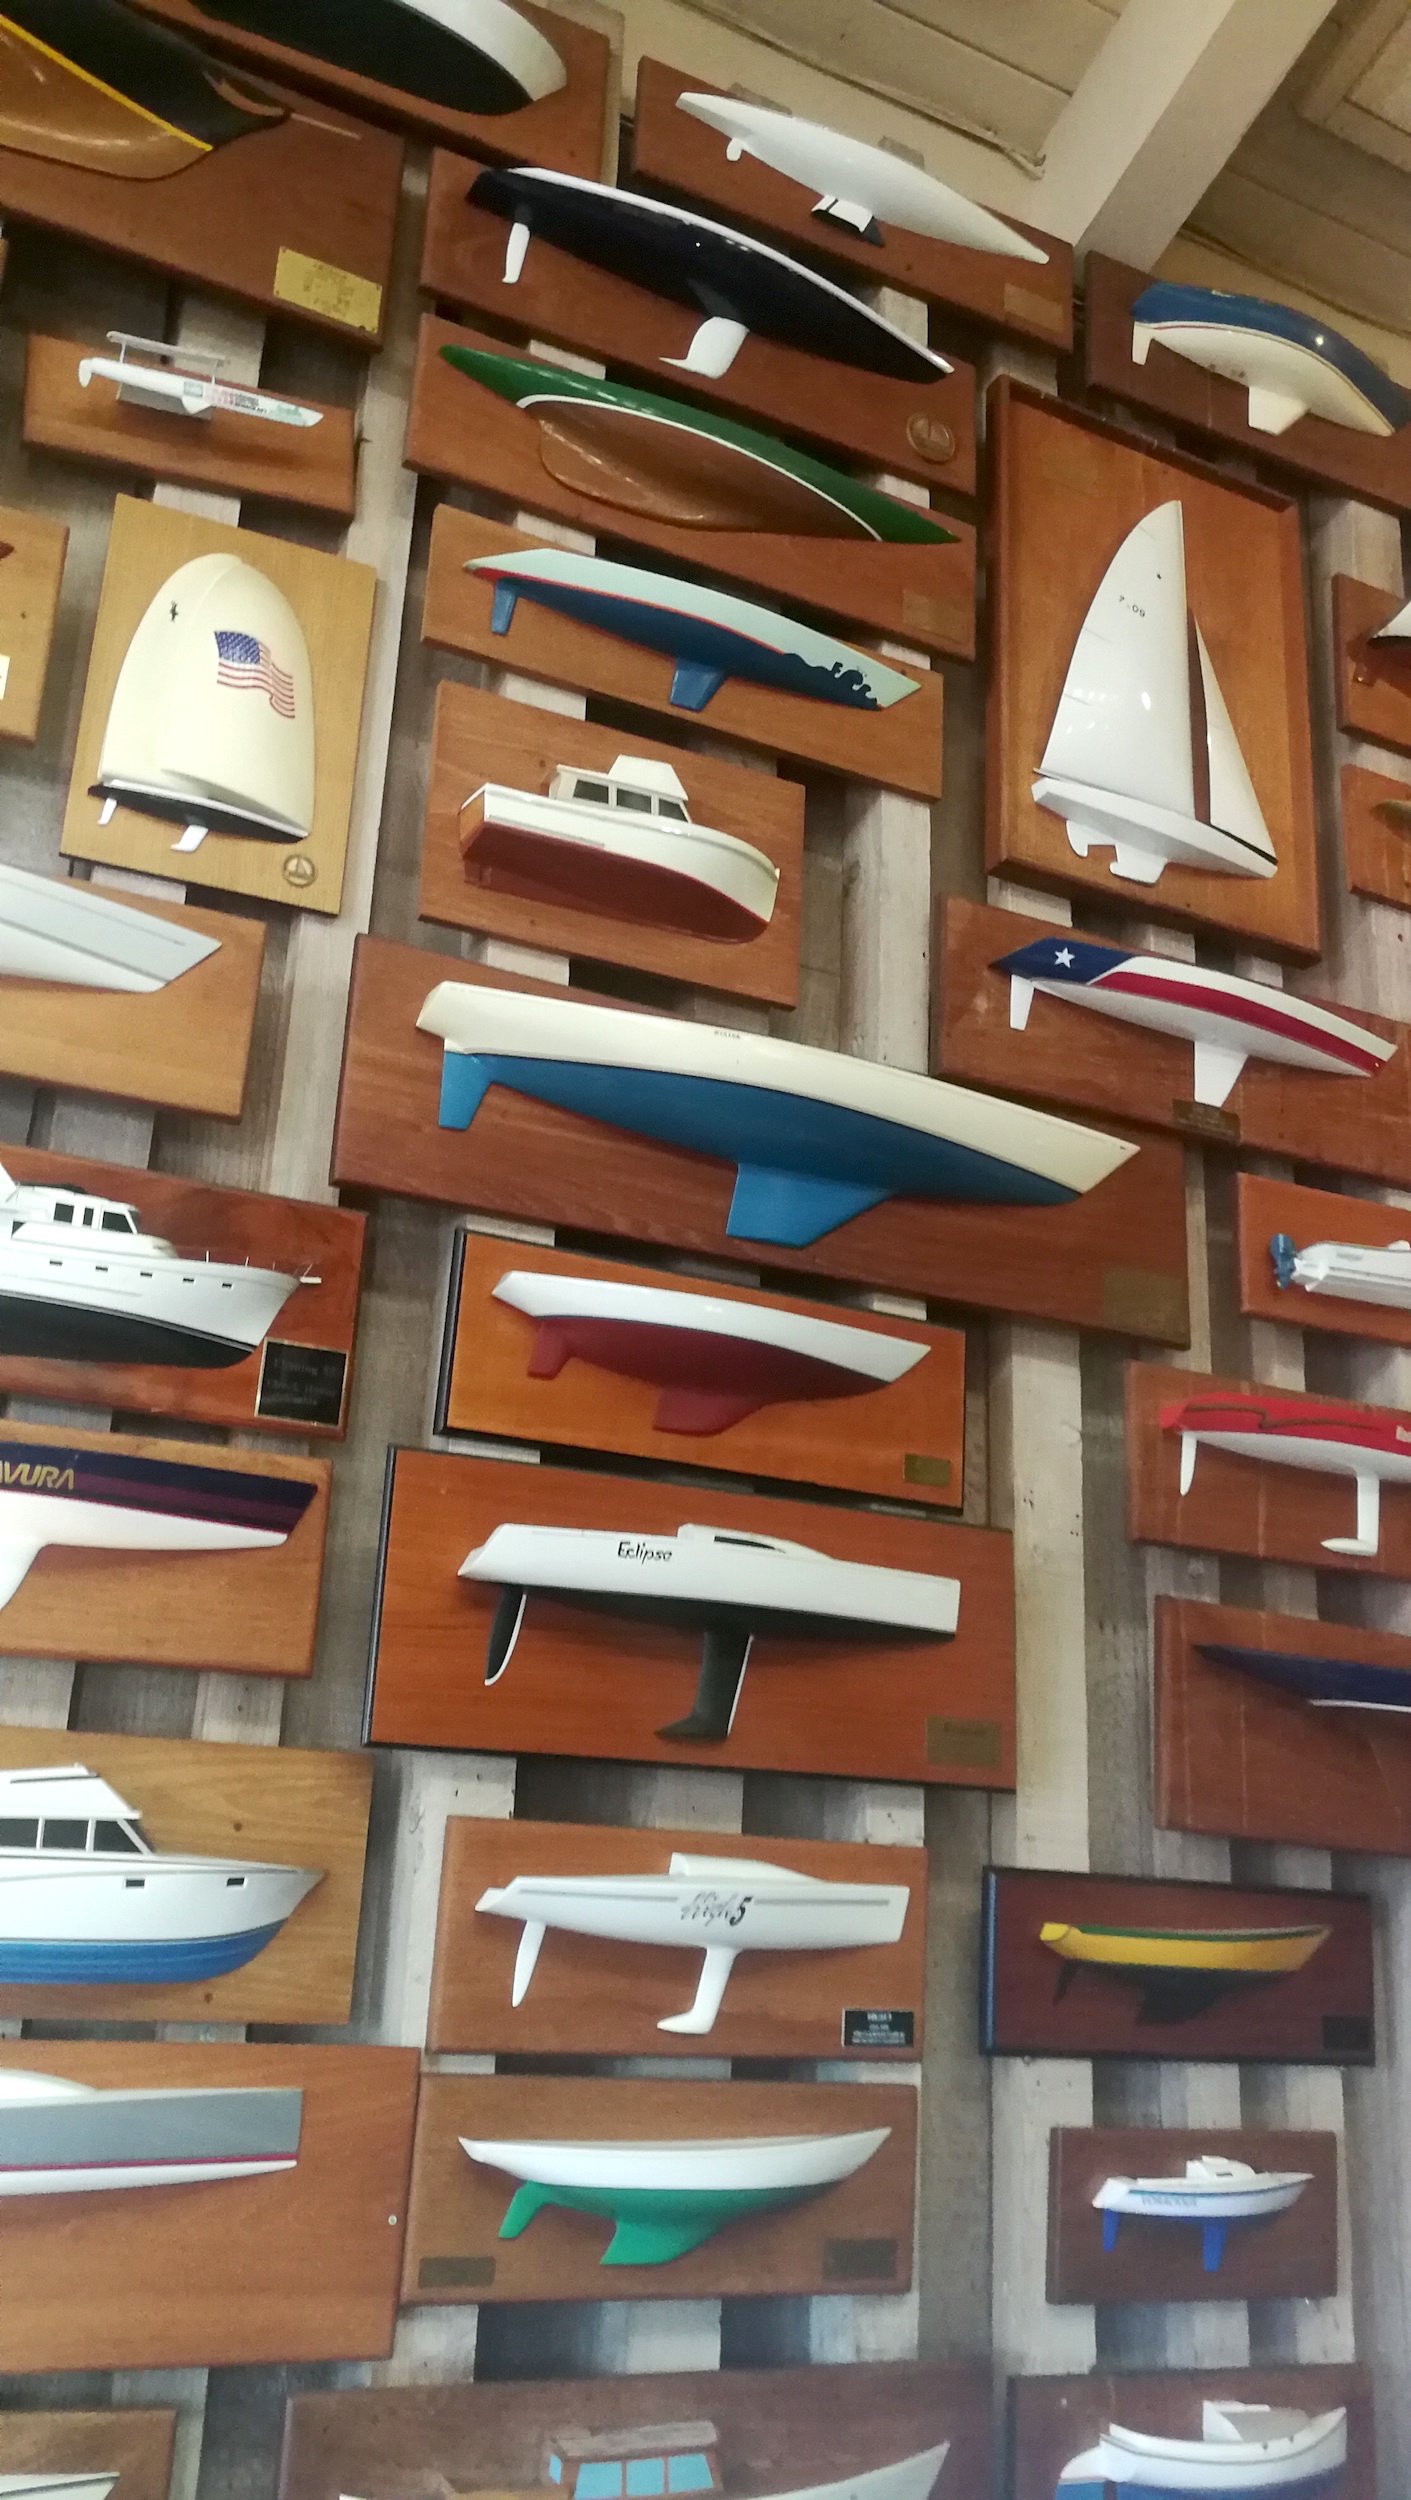 Yacht model wall at Fiddlers Green Restaurant in San Diego